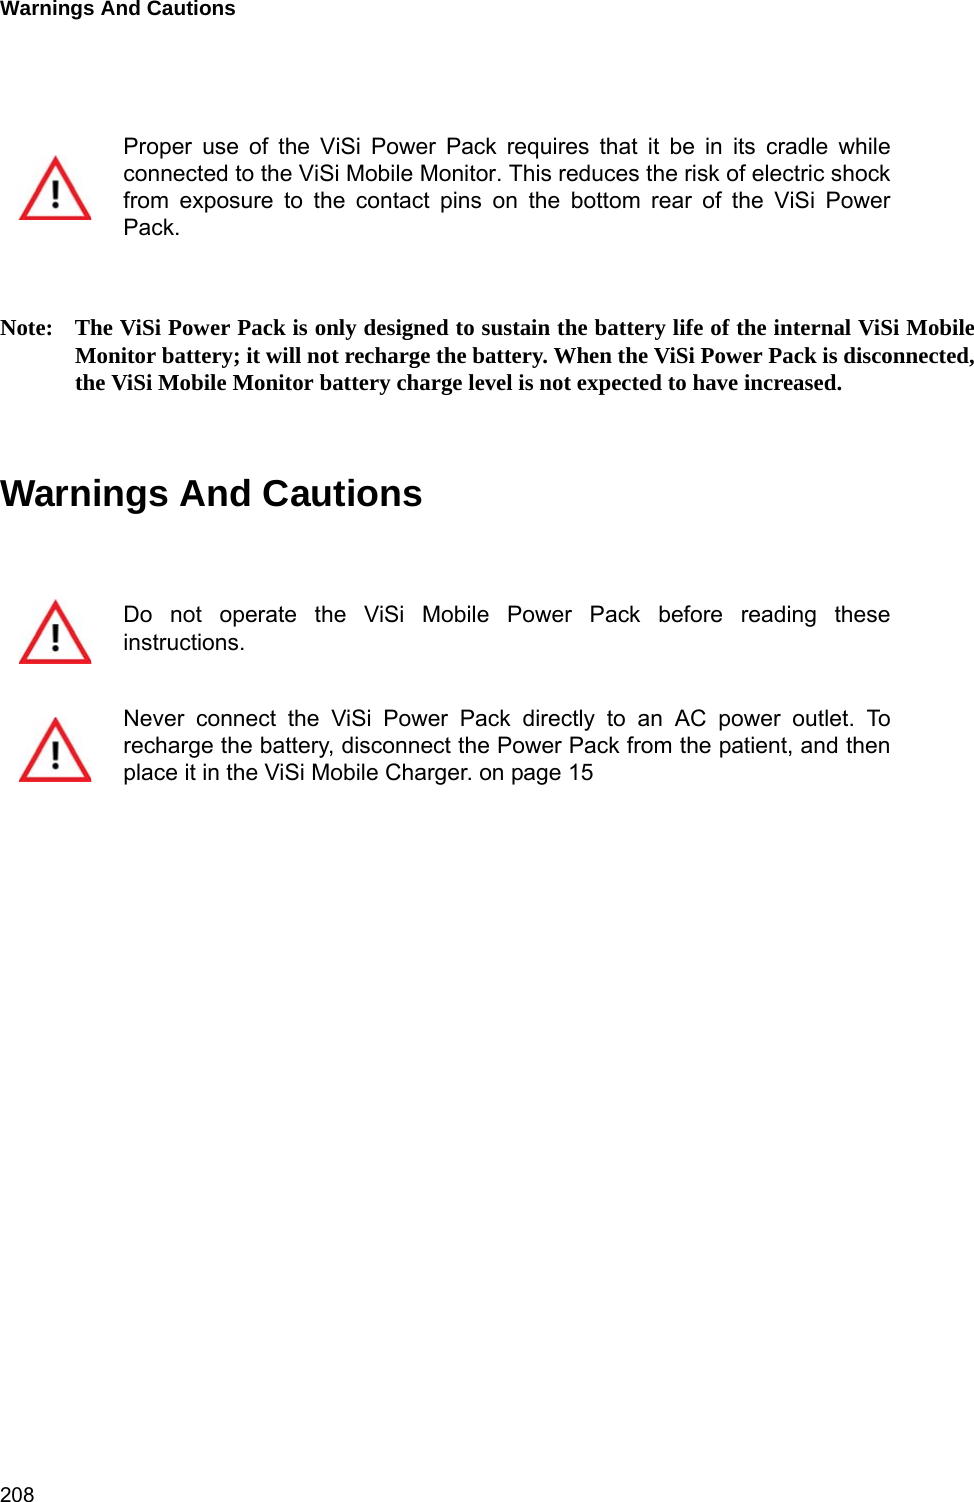 Warnings And Cautions 208Note: The ViSi Power Pack is only designed to sustain the battery life of the internal ViSi MobileMonitor battery; it will not recharge the battery. When the ViSi Power Pack is disconnected,the ViSi Mobile Monitor battery charge level is not expected to have increased.Warnings And CautionsProper use of the ViSi Power Pack requires that it be in its cradle whileconnected to the ViSi Mobile Monitor. This reduces the risk of electric shockfrom exposure to the contact pins on the bottom rear of the ViSi PowerPack.Do not operate the ViSi Mobile Power Pack before reading theseinstructions.Never connect the ViSi Power Pack directly to an AC power outlet. Torecharge the battery, disconnect the Power Pack from the patient, and thenplace it in the ViSi Mobile Charger. on page 15